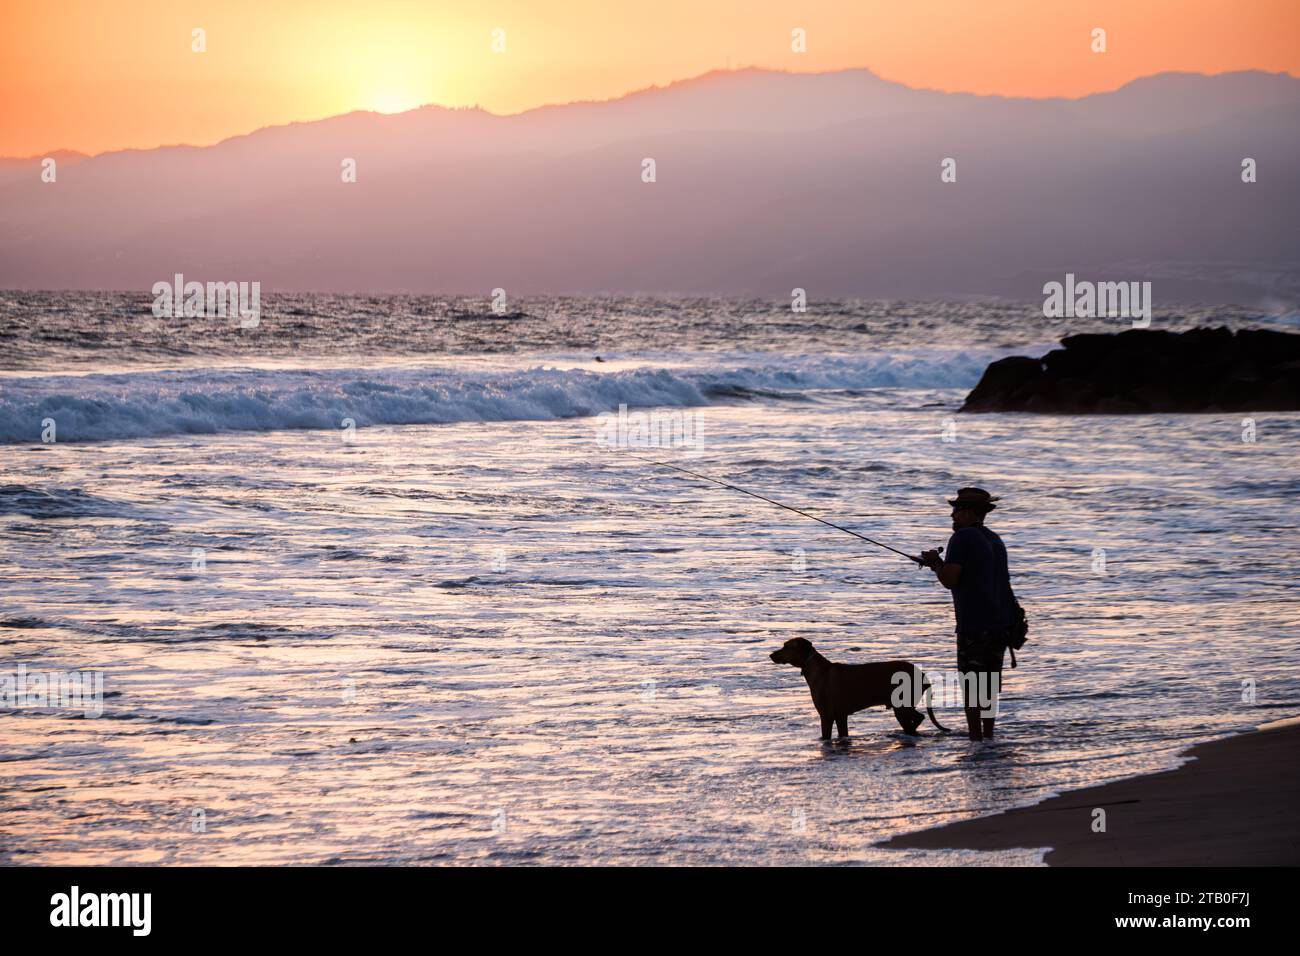 Silhouettes on the beach at sunset in Venice Beach, California, USA, Pacific Coast. Stock Photo